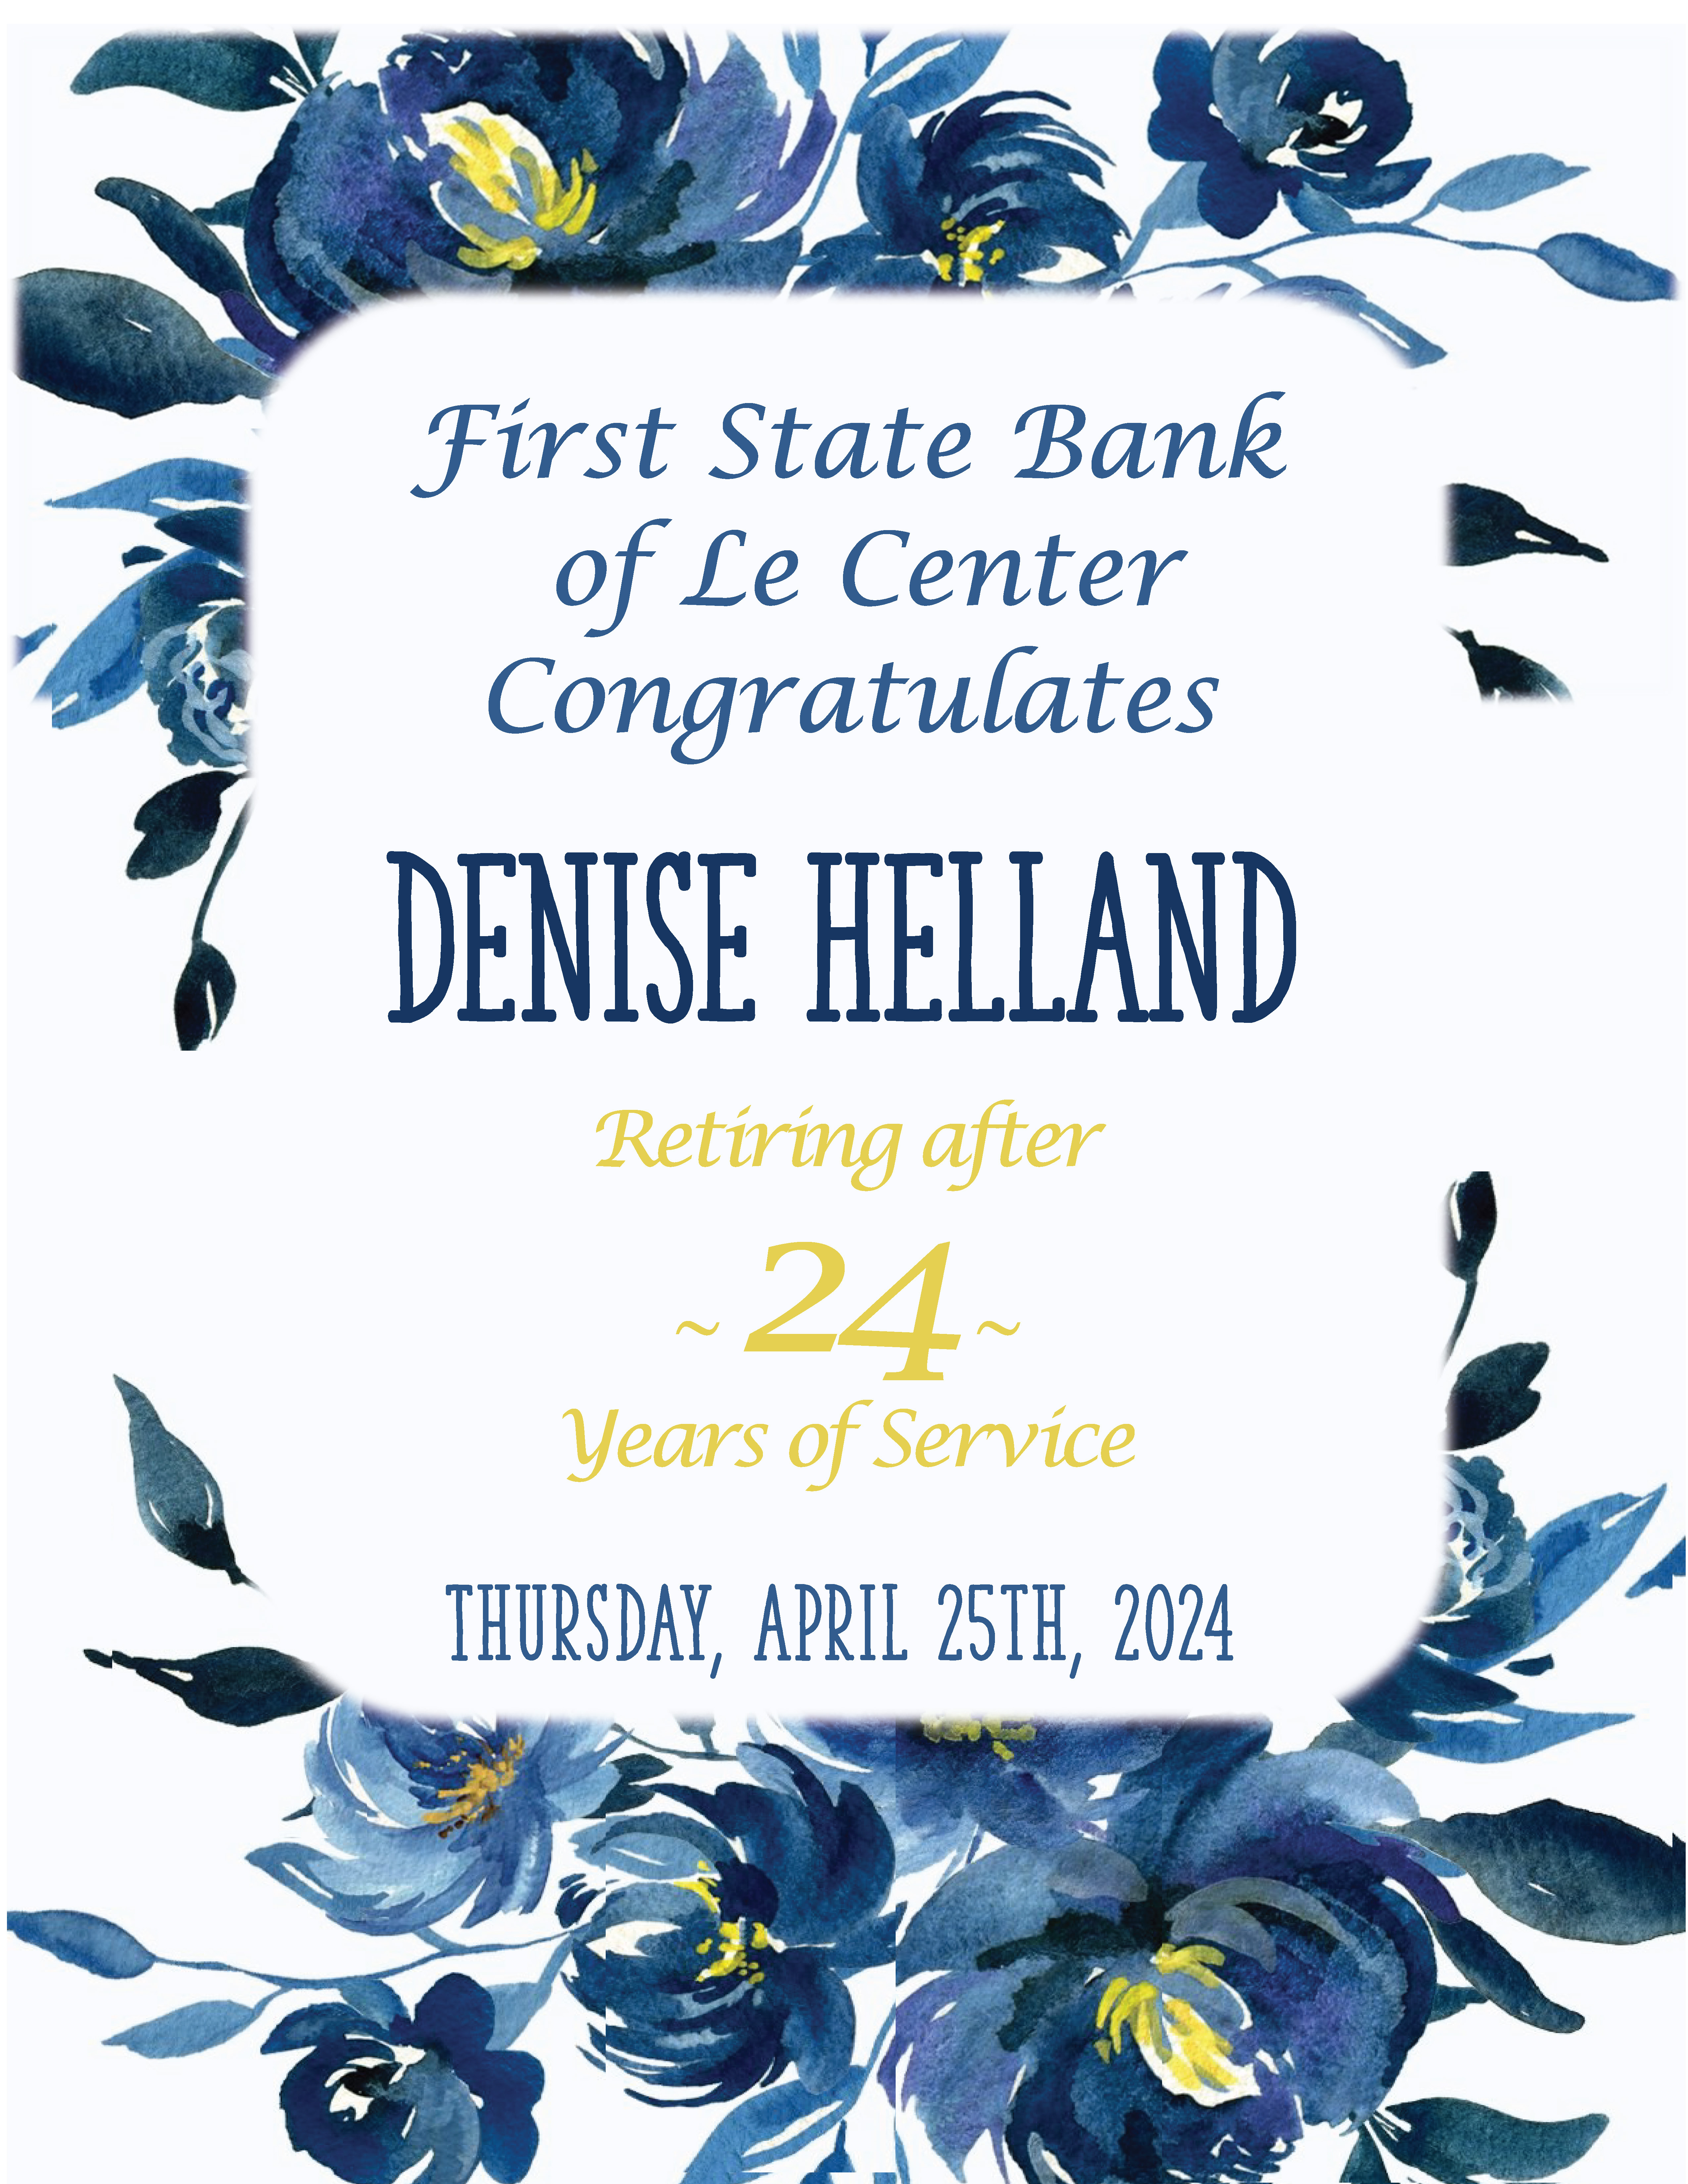 First State Bank of Le Center Congratulates Denise Helland - retiring after 24 years of service. Thursday, April 25th, 2024.